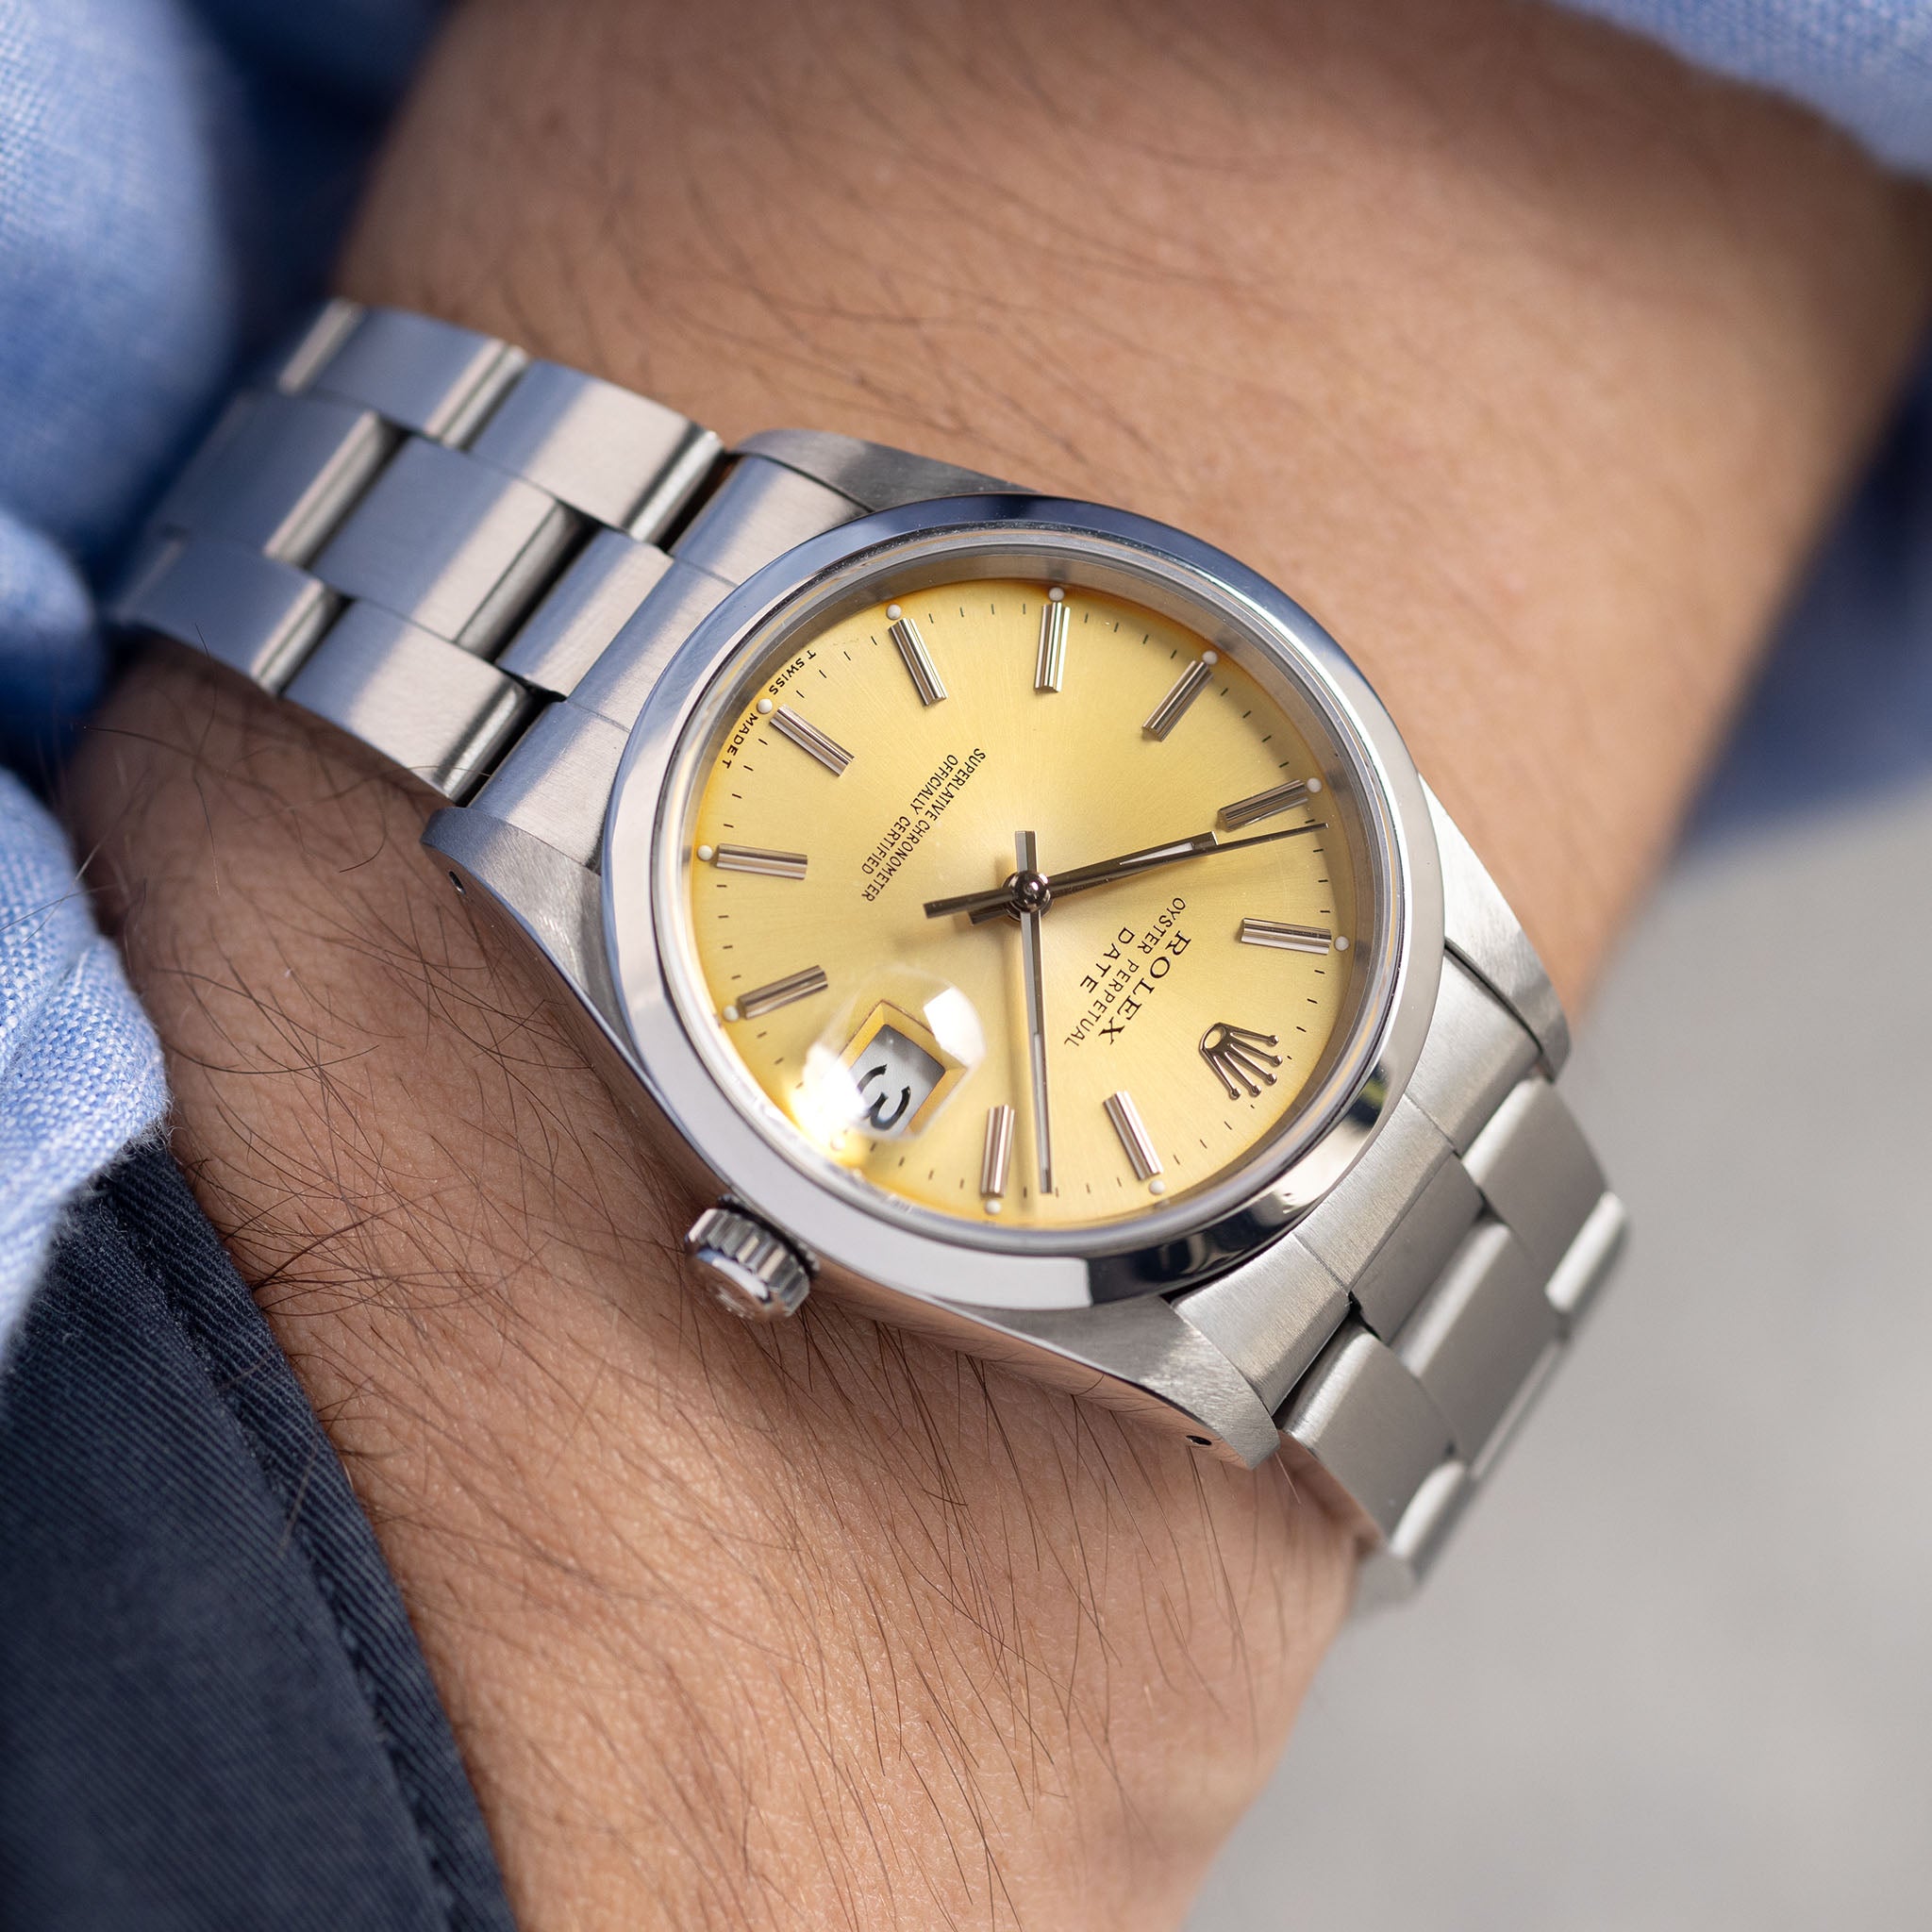 Rolex Oyster Perpetual Date Colour Change Dial Ref 15200